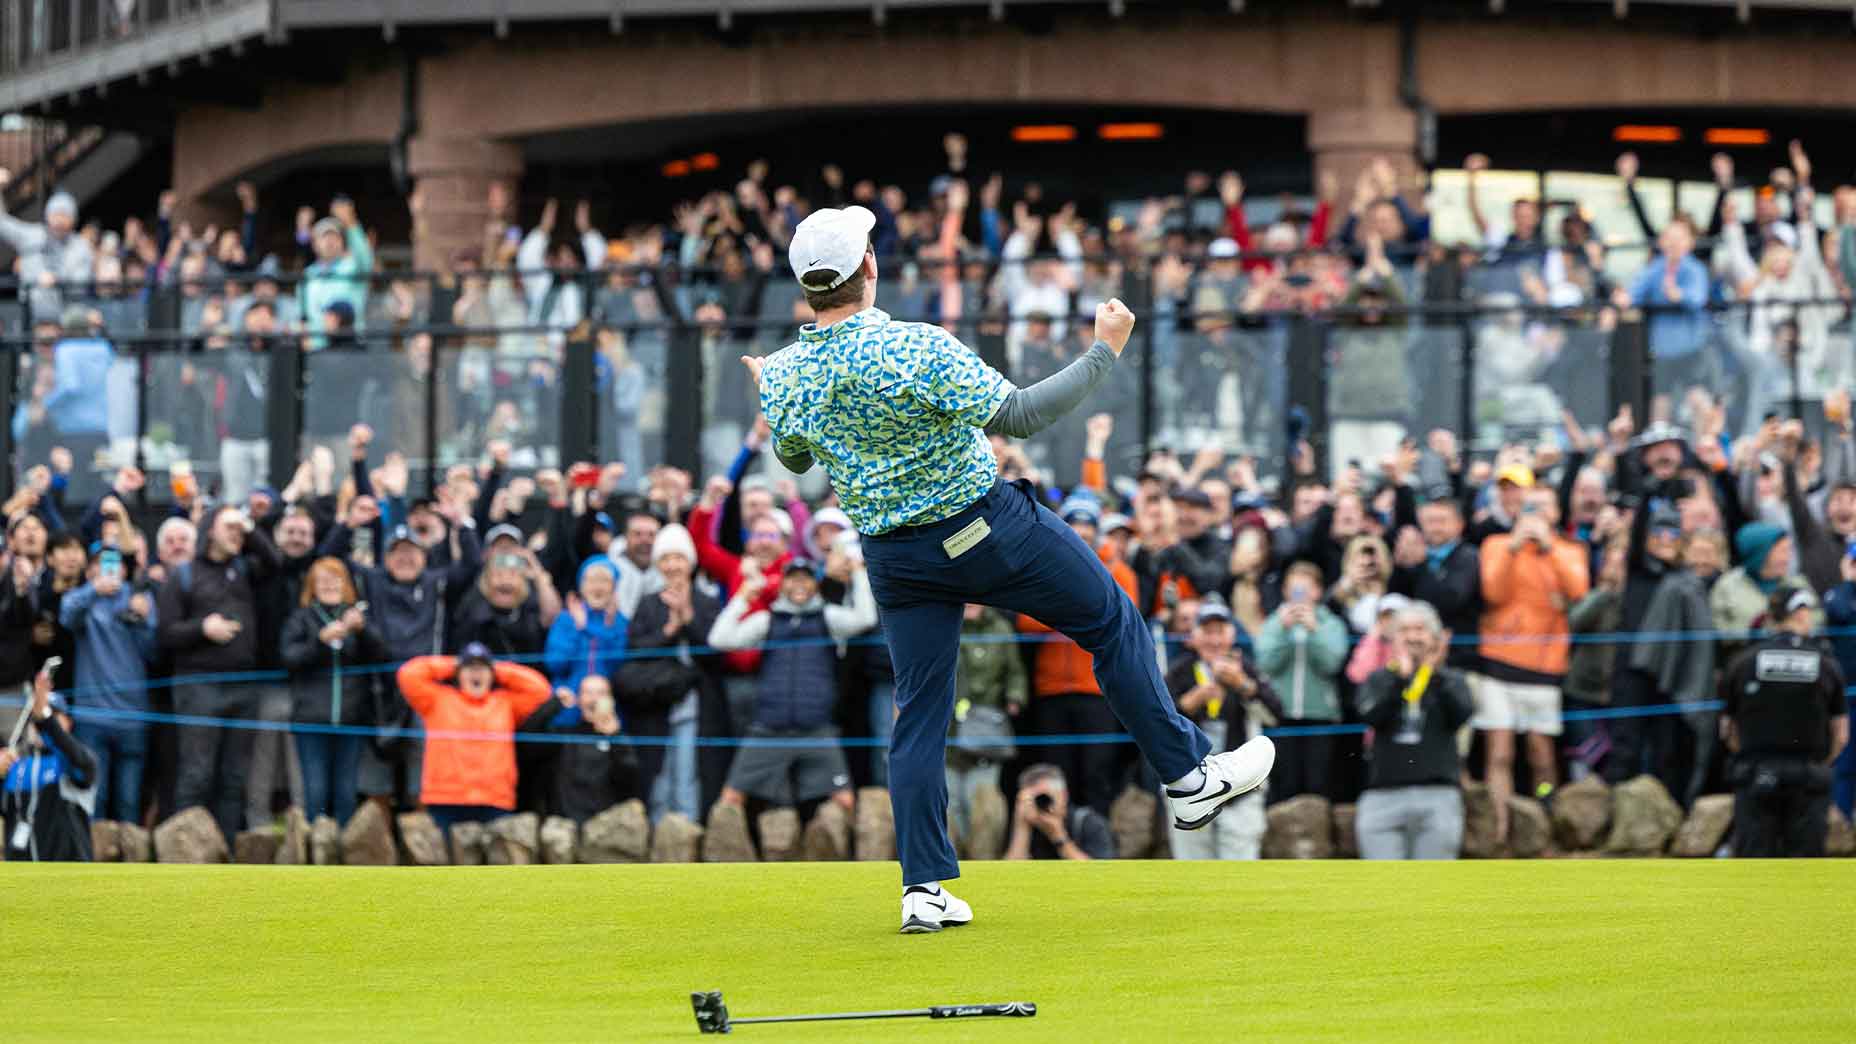 The electrifying moments after Robert MacIntyre’s career-defining putt